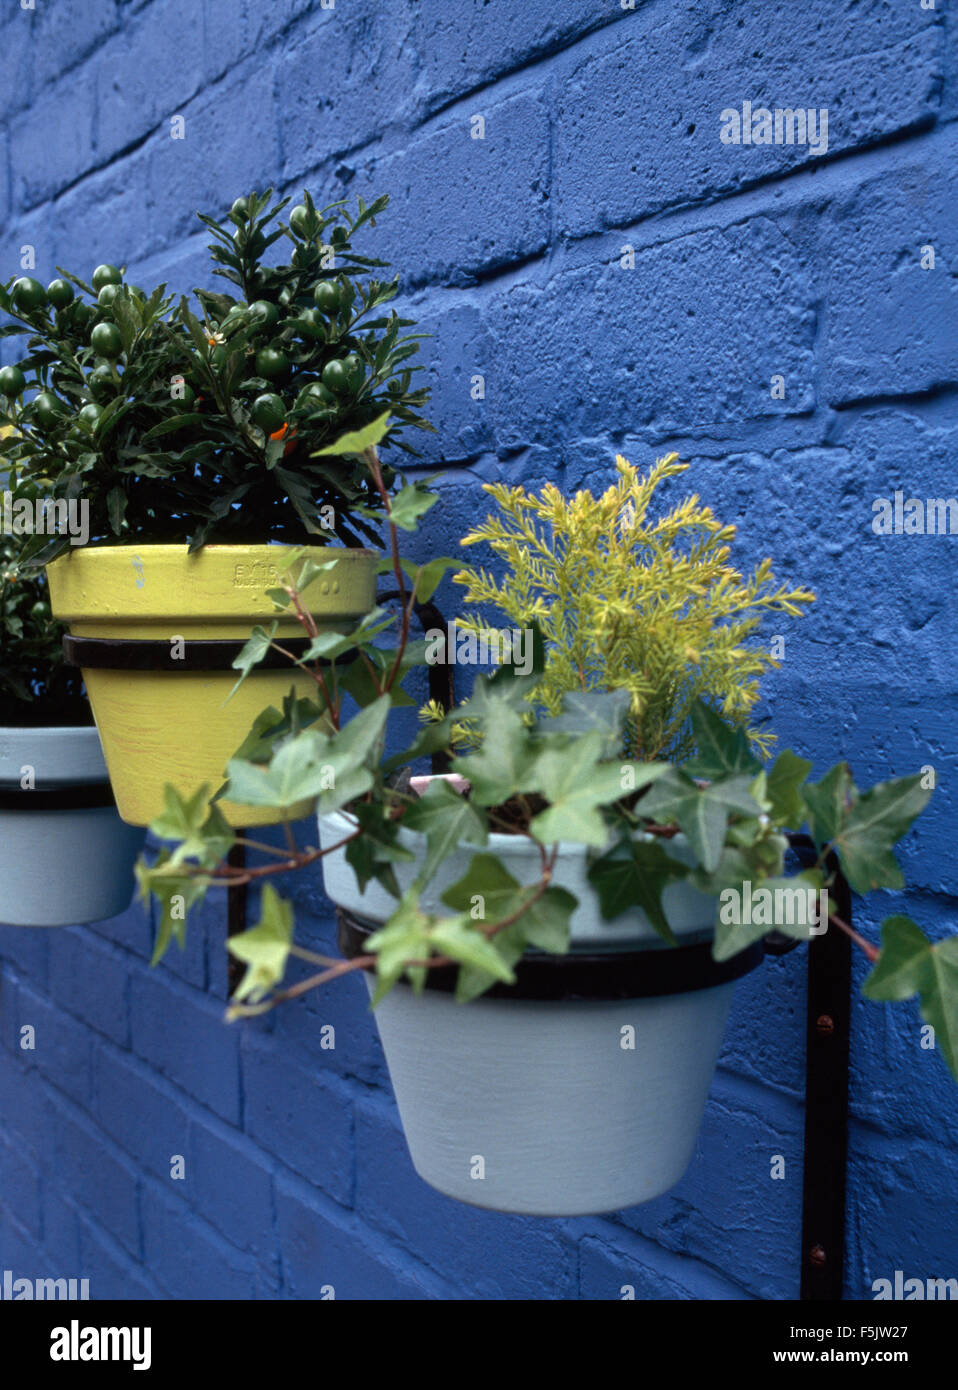 Close-up of green ivy and small shrubs in pots on a blue painted garden wall Stock Photo